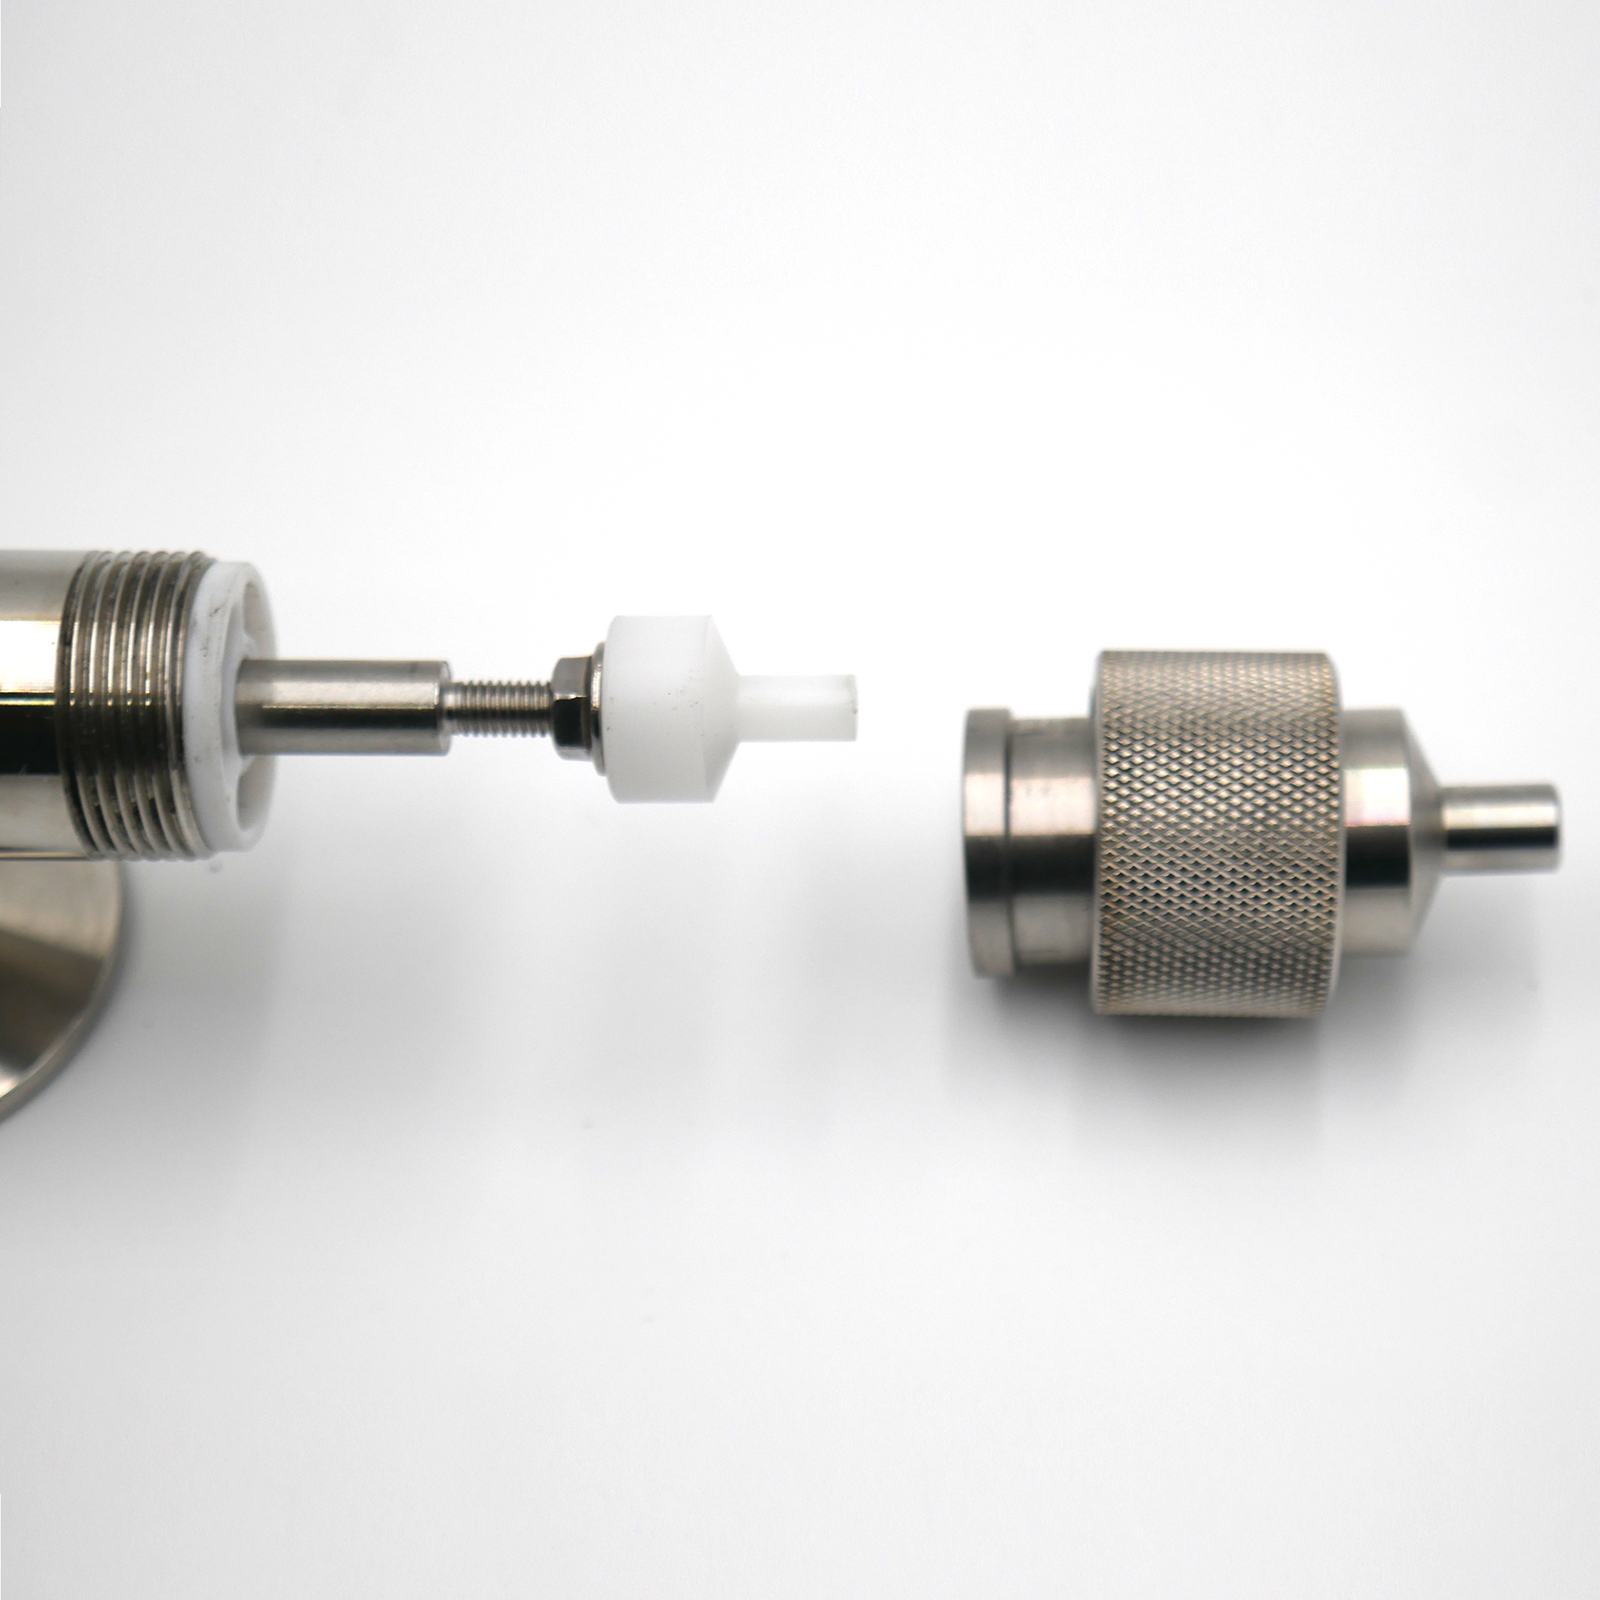 12mm dispensing nozzle assembly for liquid piston fillers